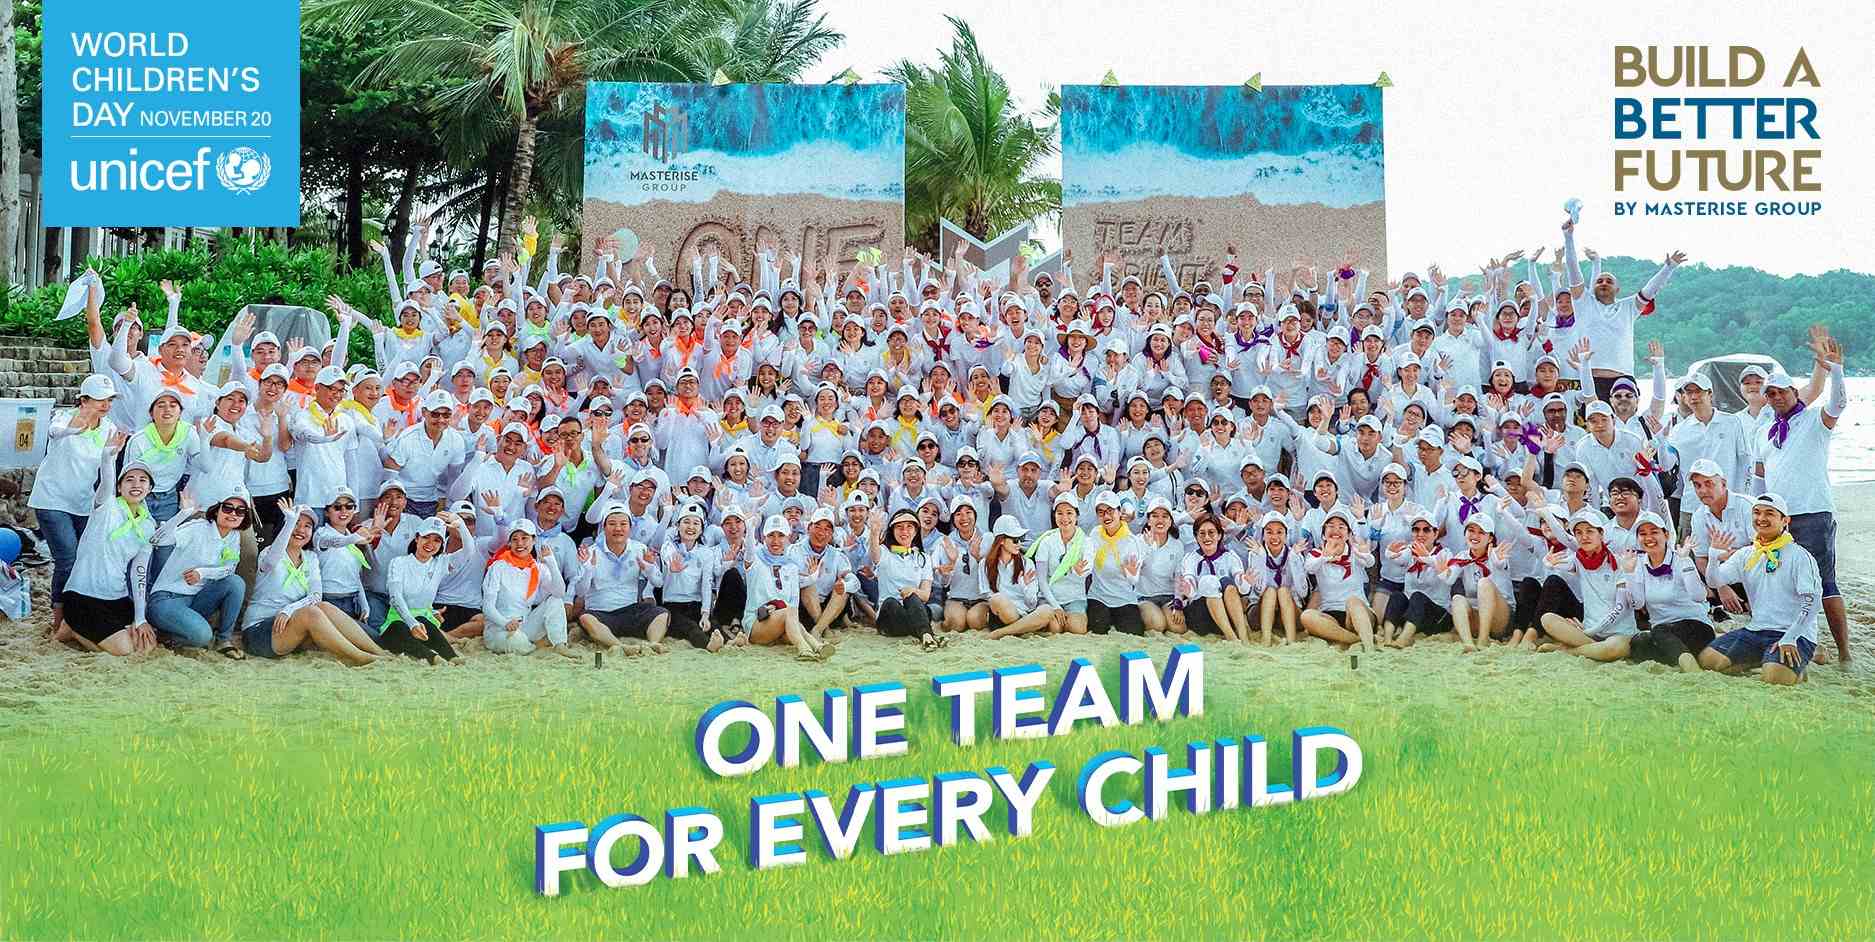 TOGETHER WITH MASTERISE GROUP BECOME A TEACHER OF UNICEF #For_Every_Child